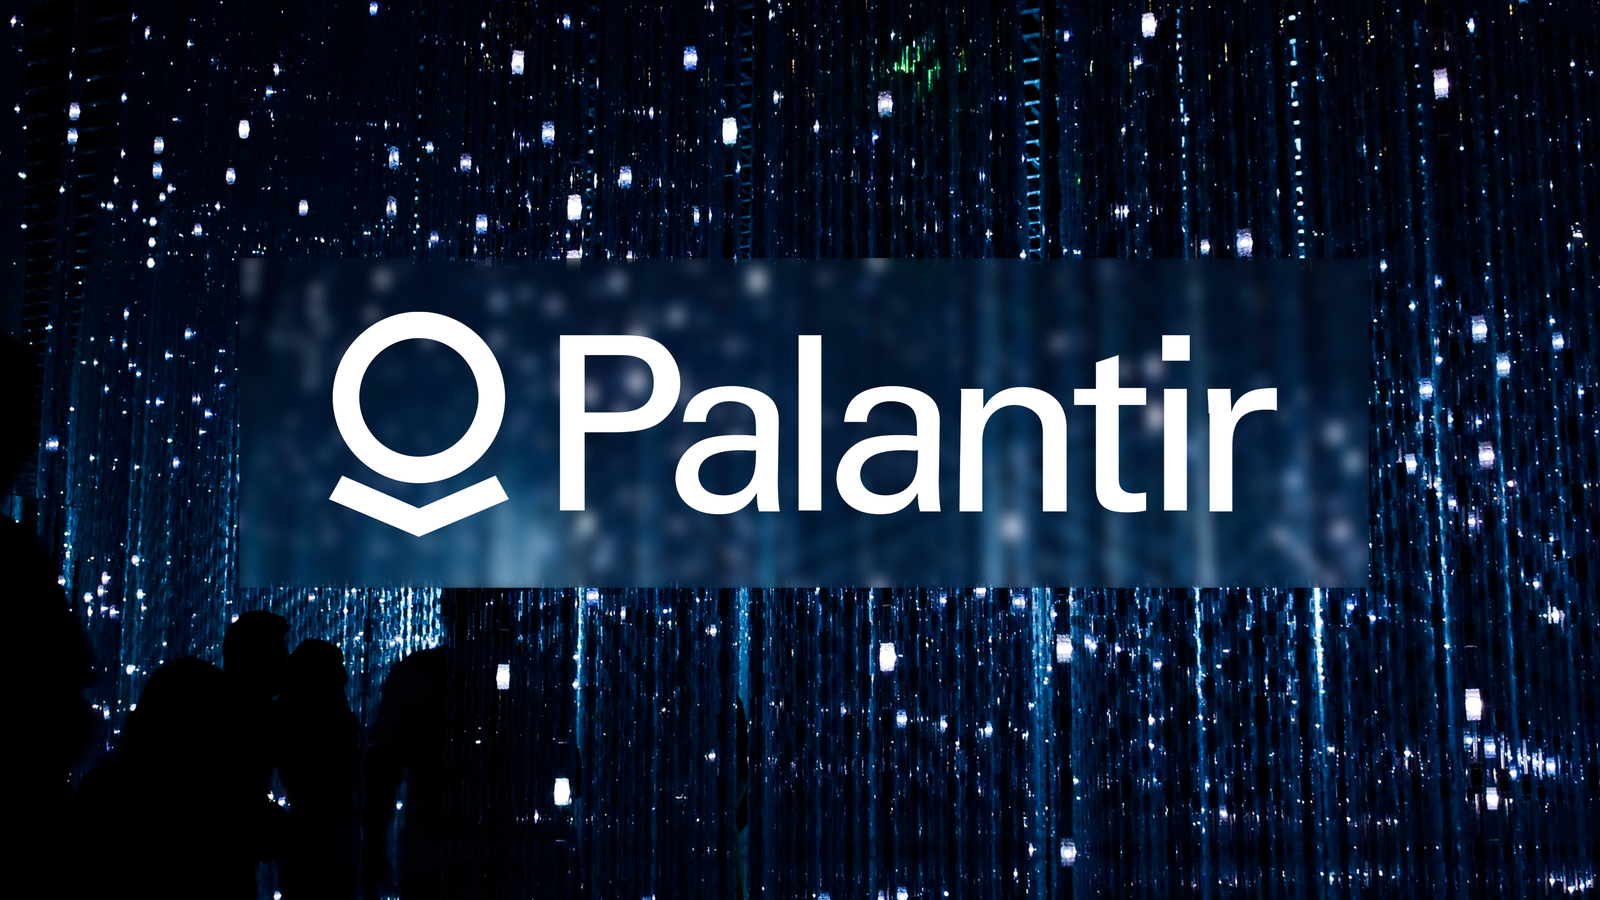 Palantir (NYSE: PLTR) Technologies Low in Place or More Downside?